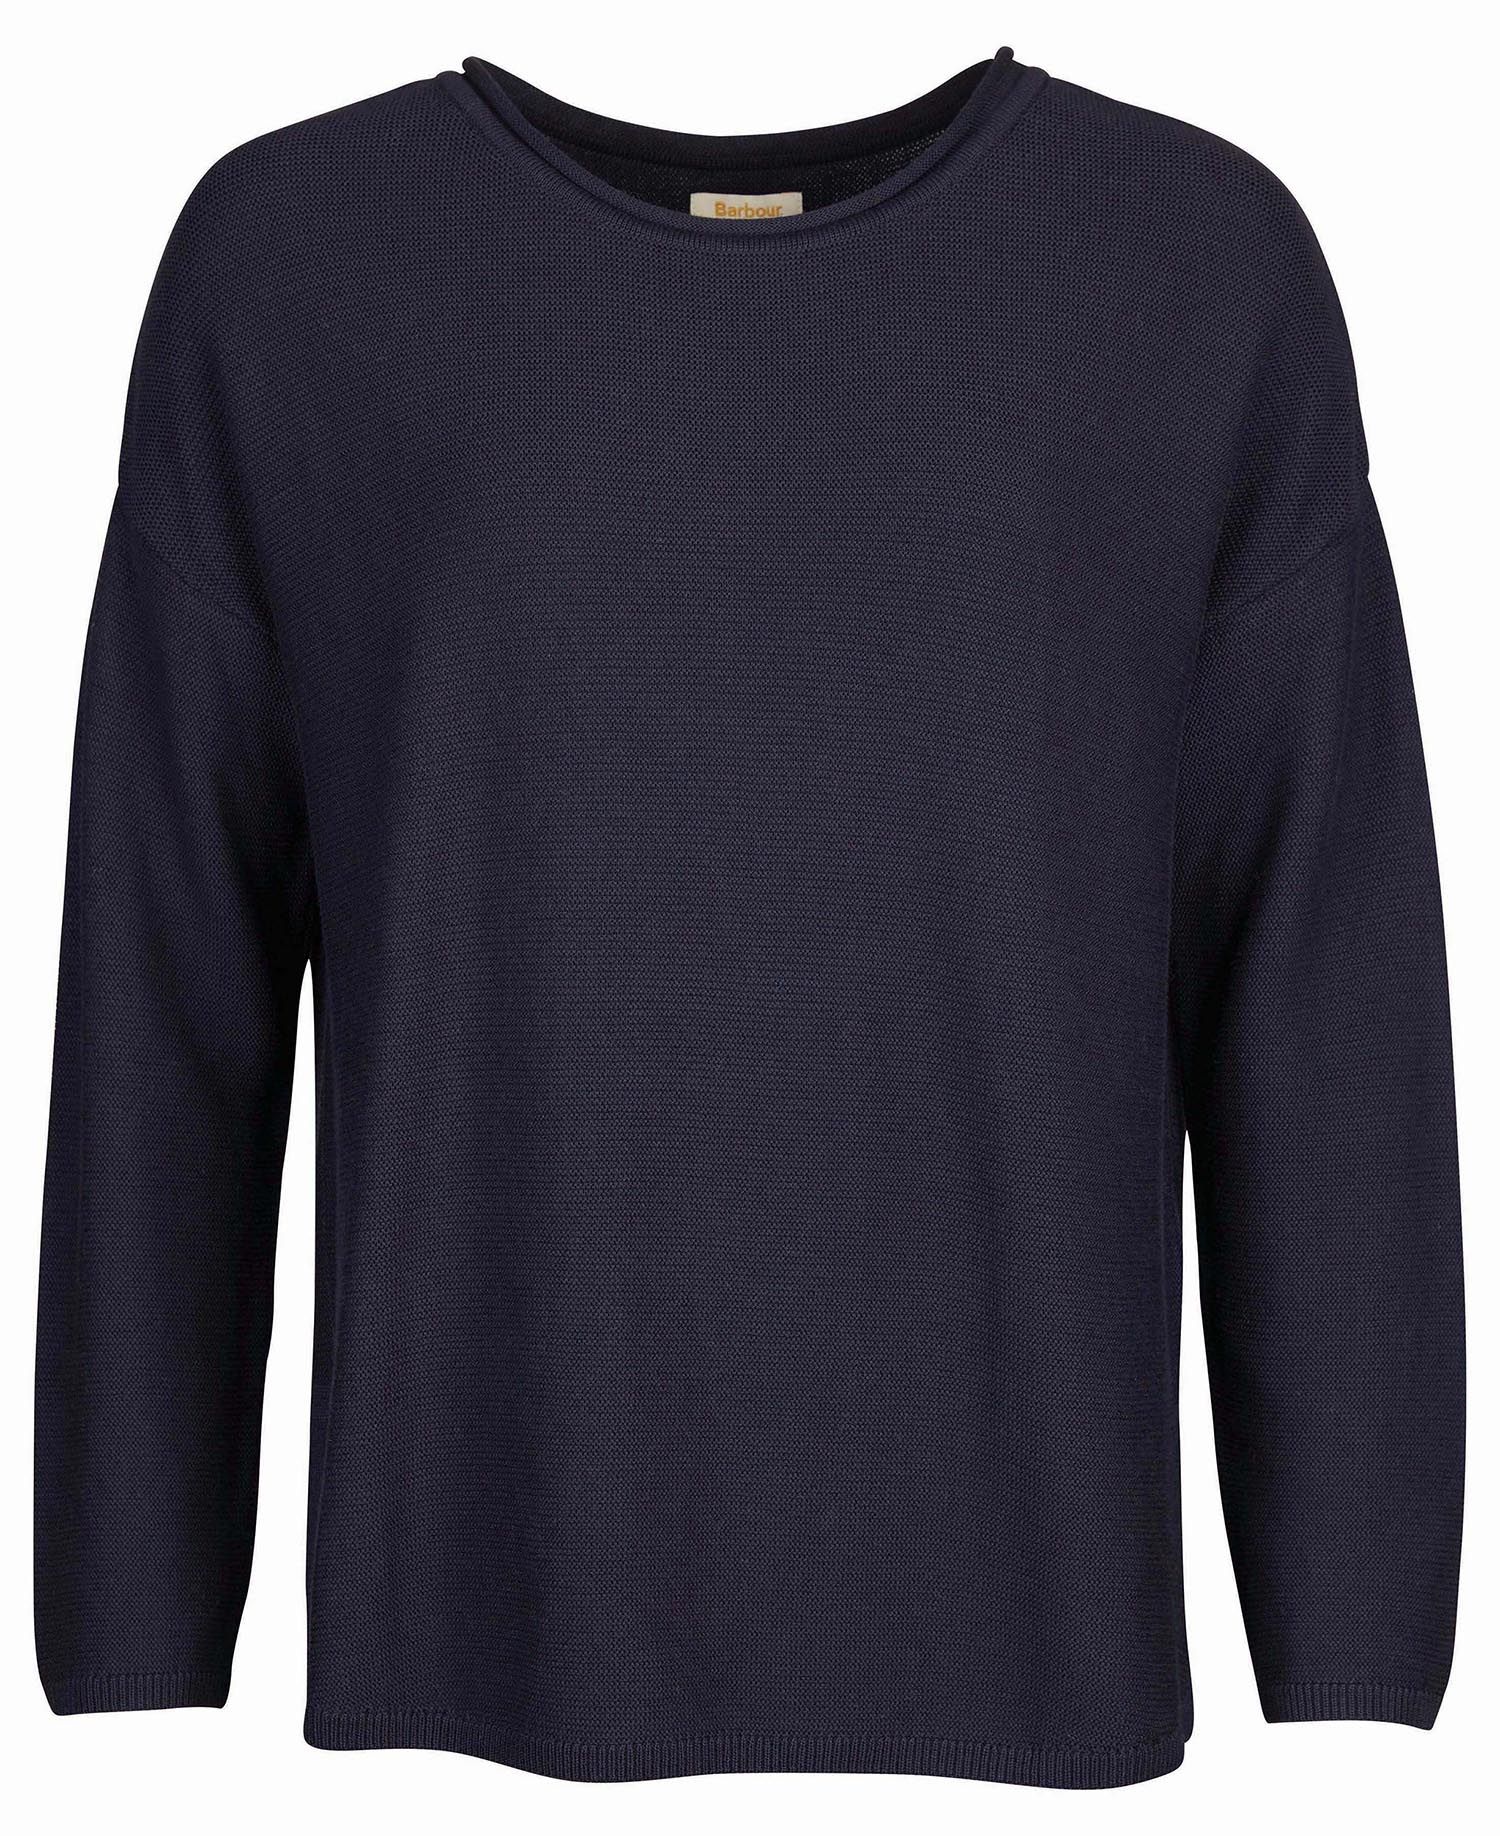 Barbour Mariner Knit Pullover - Navy